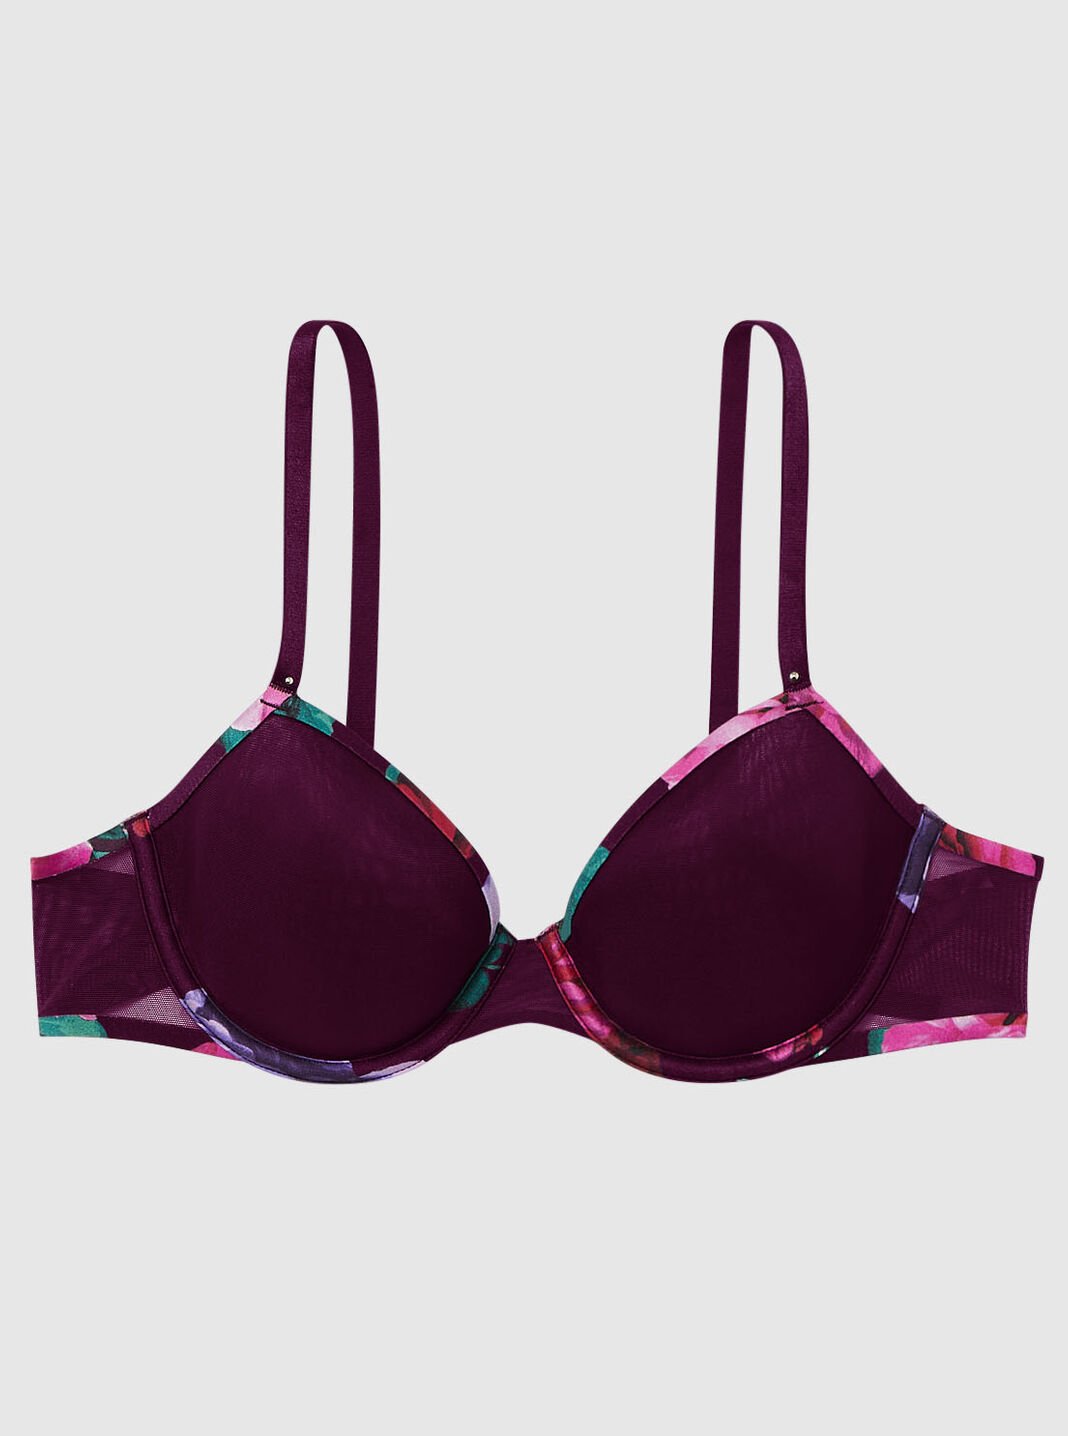 The Spacer Bra Collection, Demi Bras